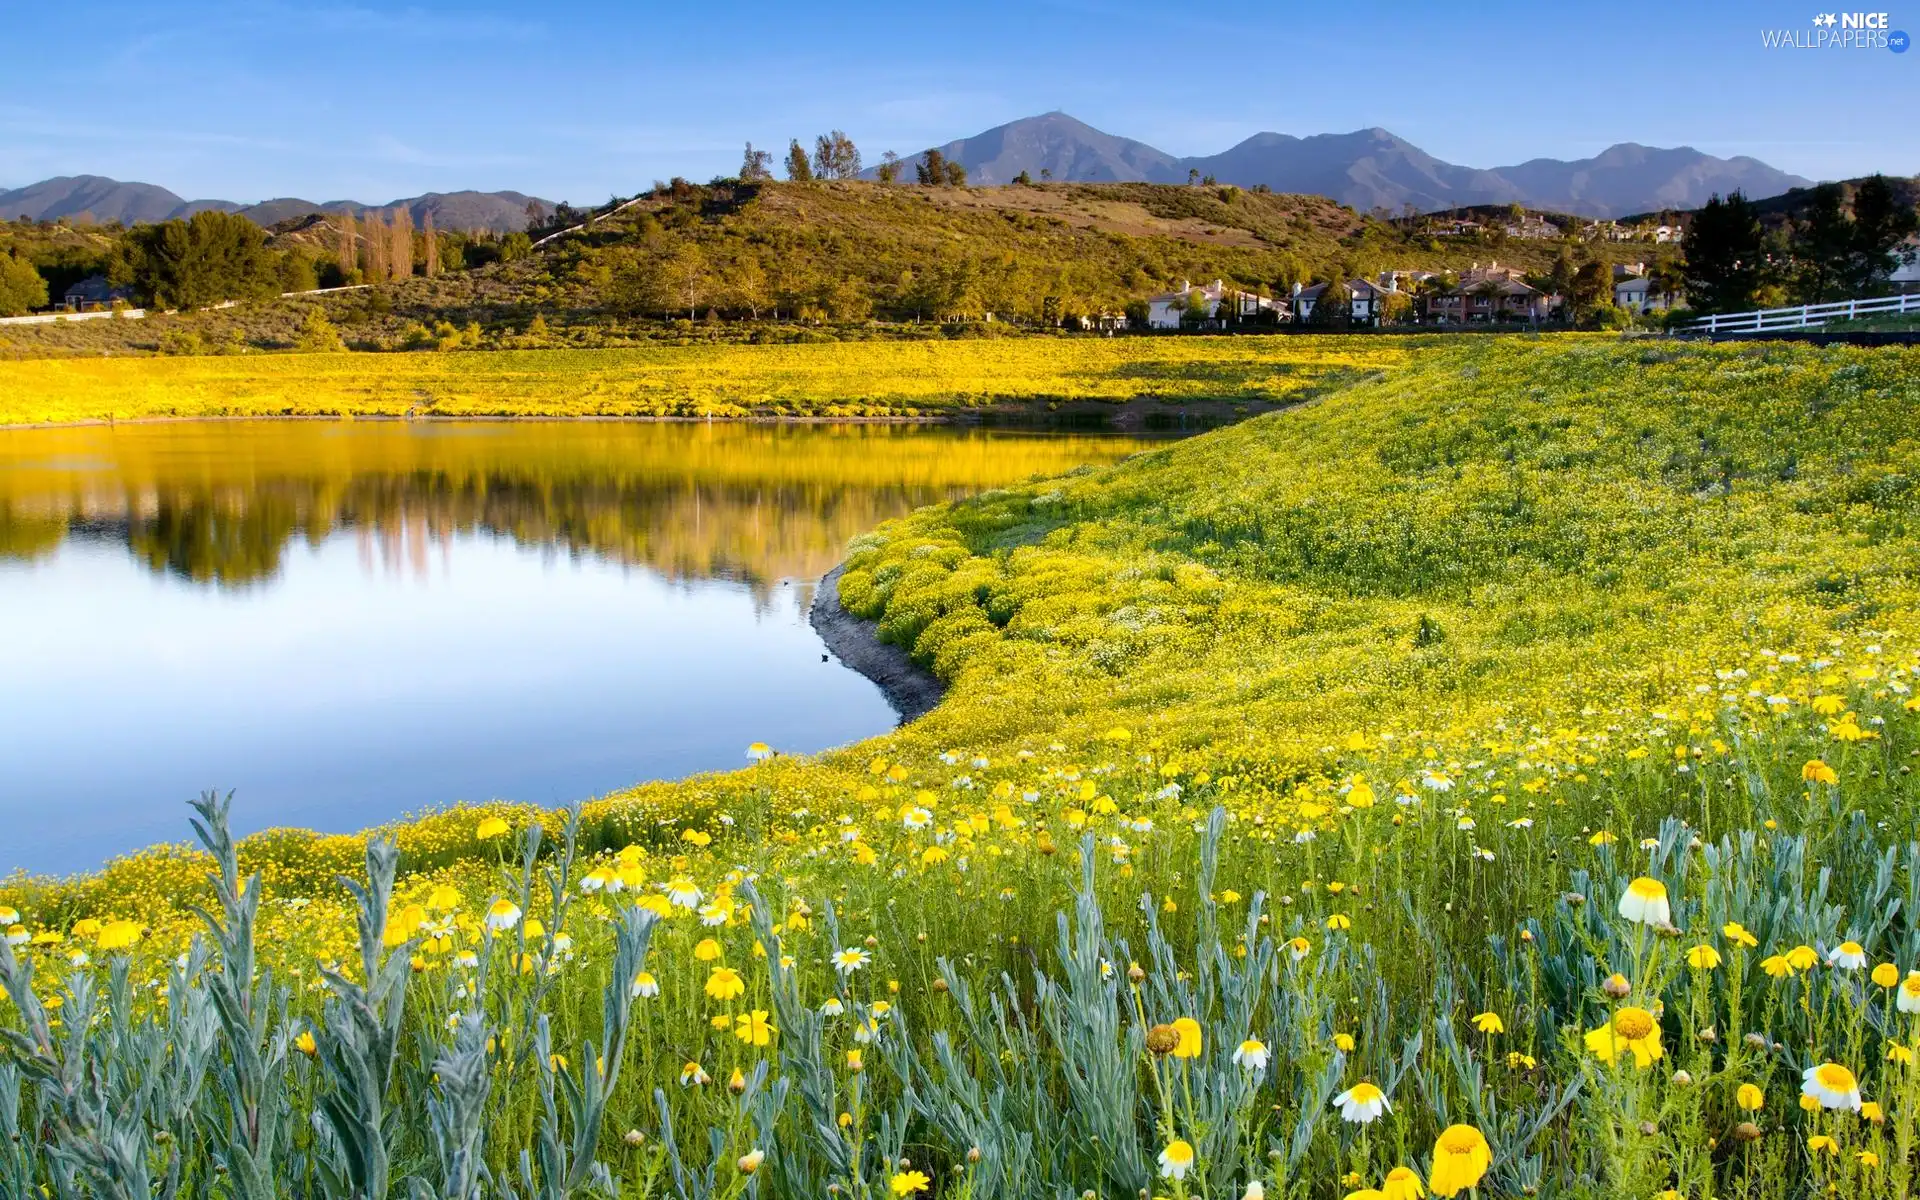 Mountains, Meadow, Flowers, Pond - car